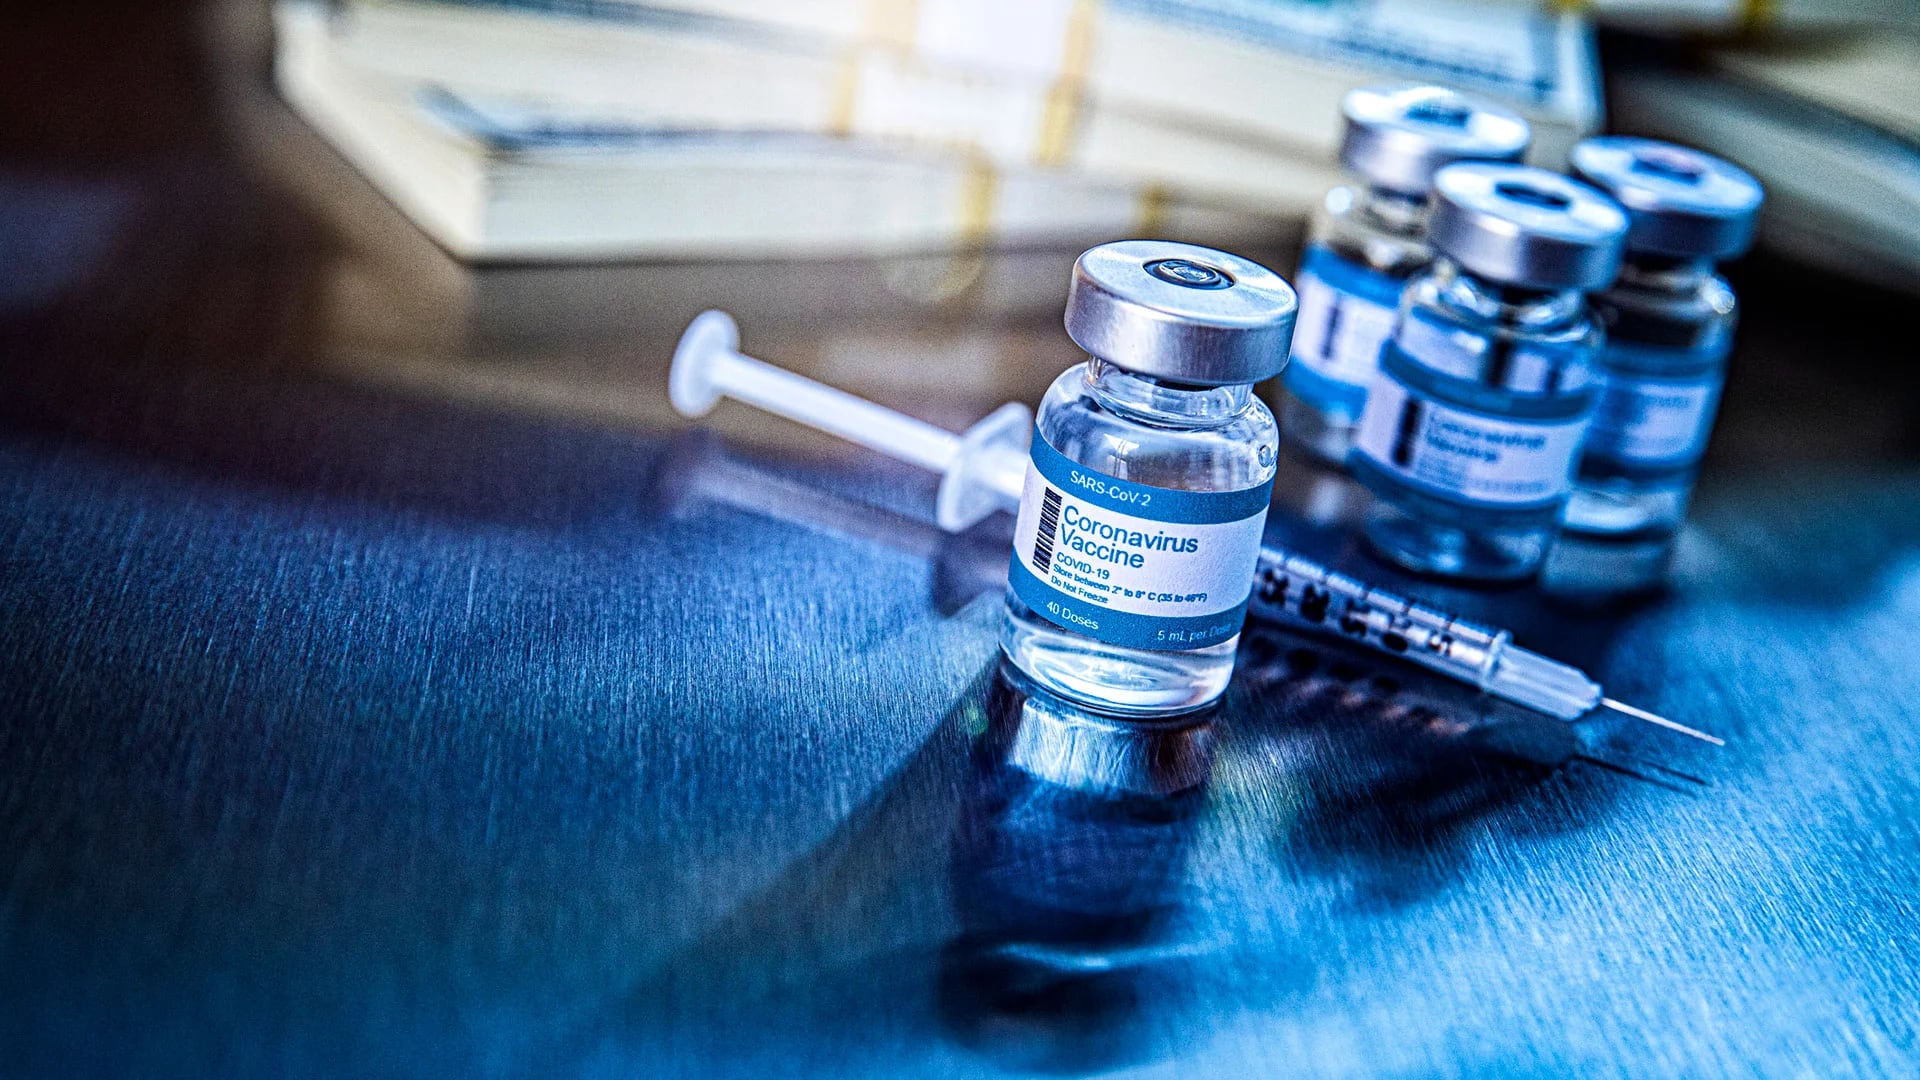 Illustrative vial of coronavirus vaccine and how expensive it will  cost
Gettyimages